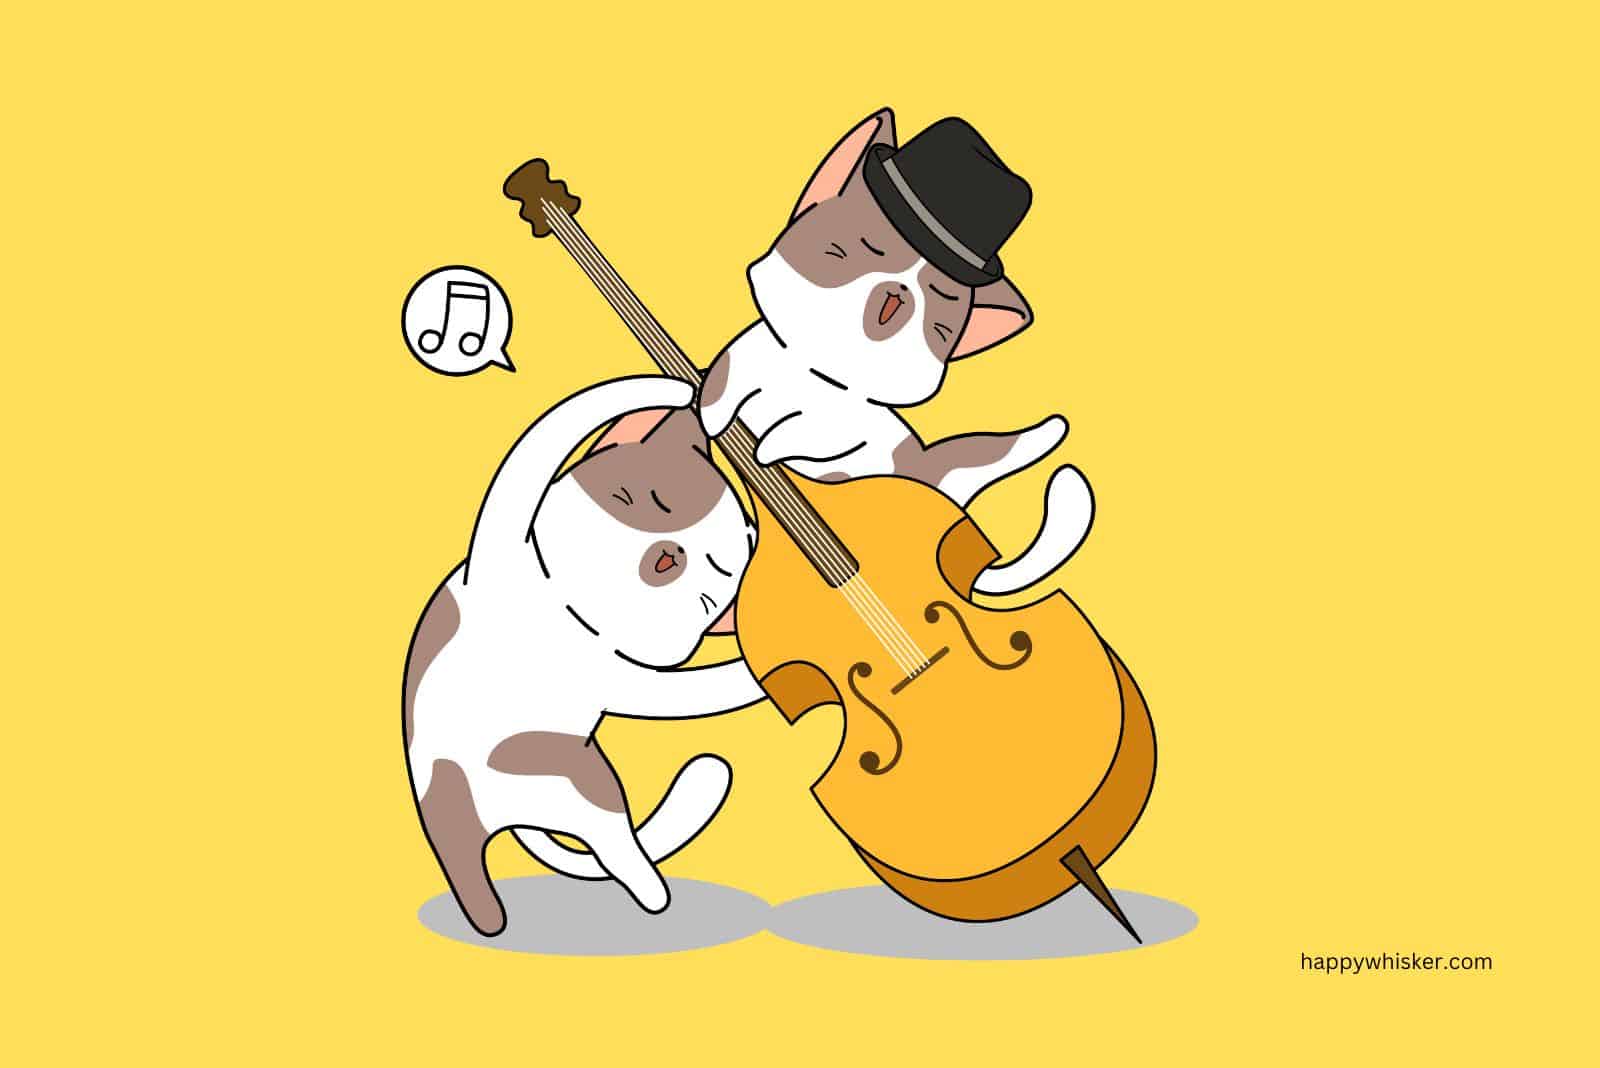 illustration of two cats playing a guitar